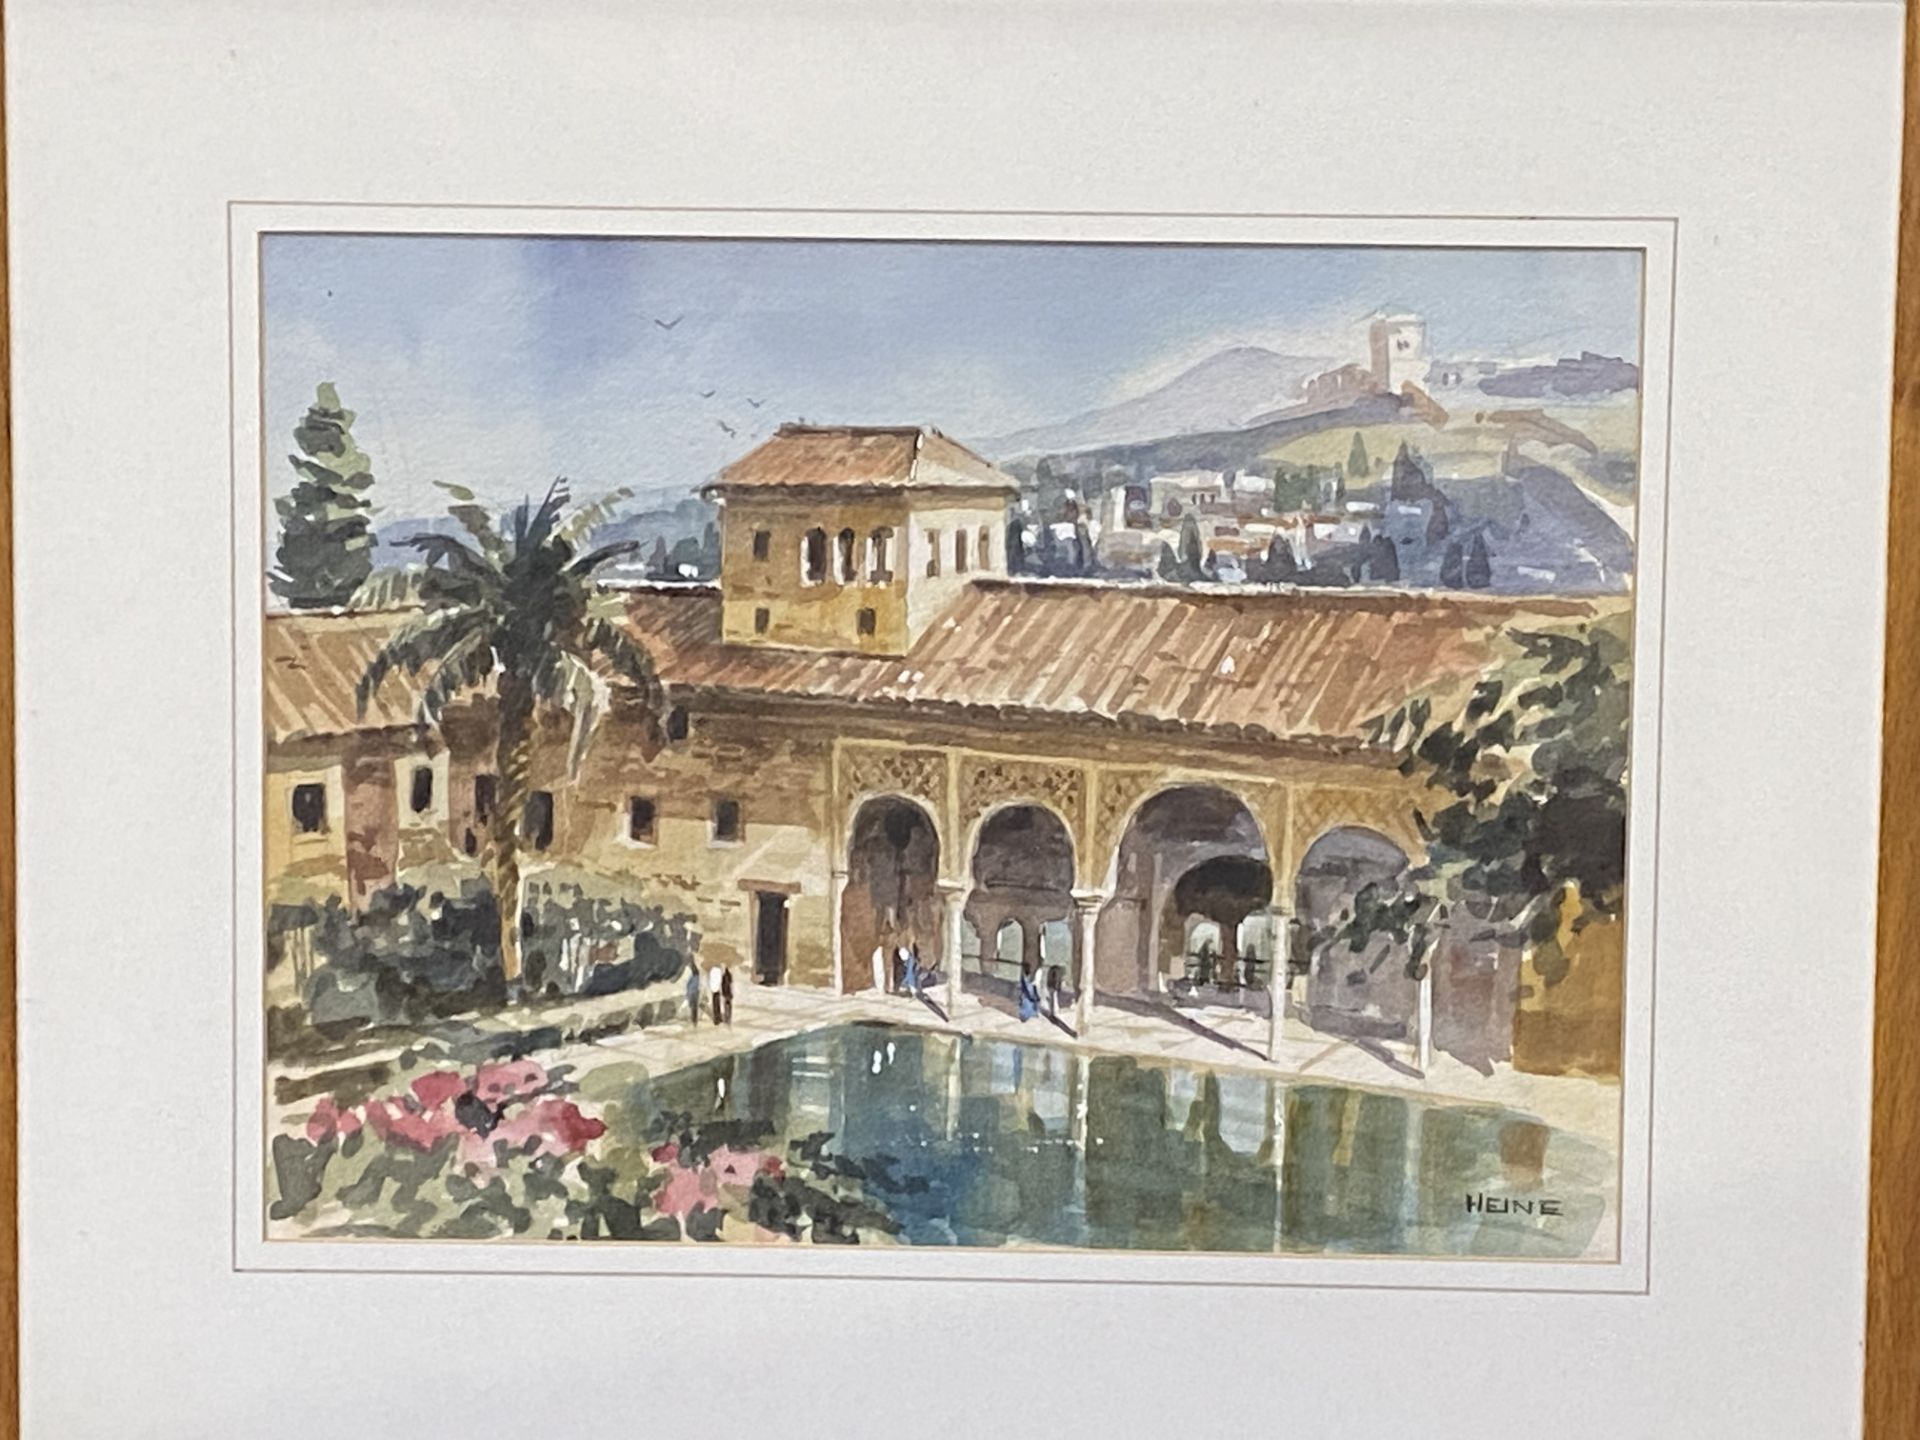 Framed and glazed watercolour of the Lady's Tower in Alhambra - Image 2 of 3